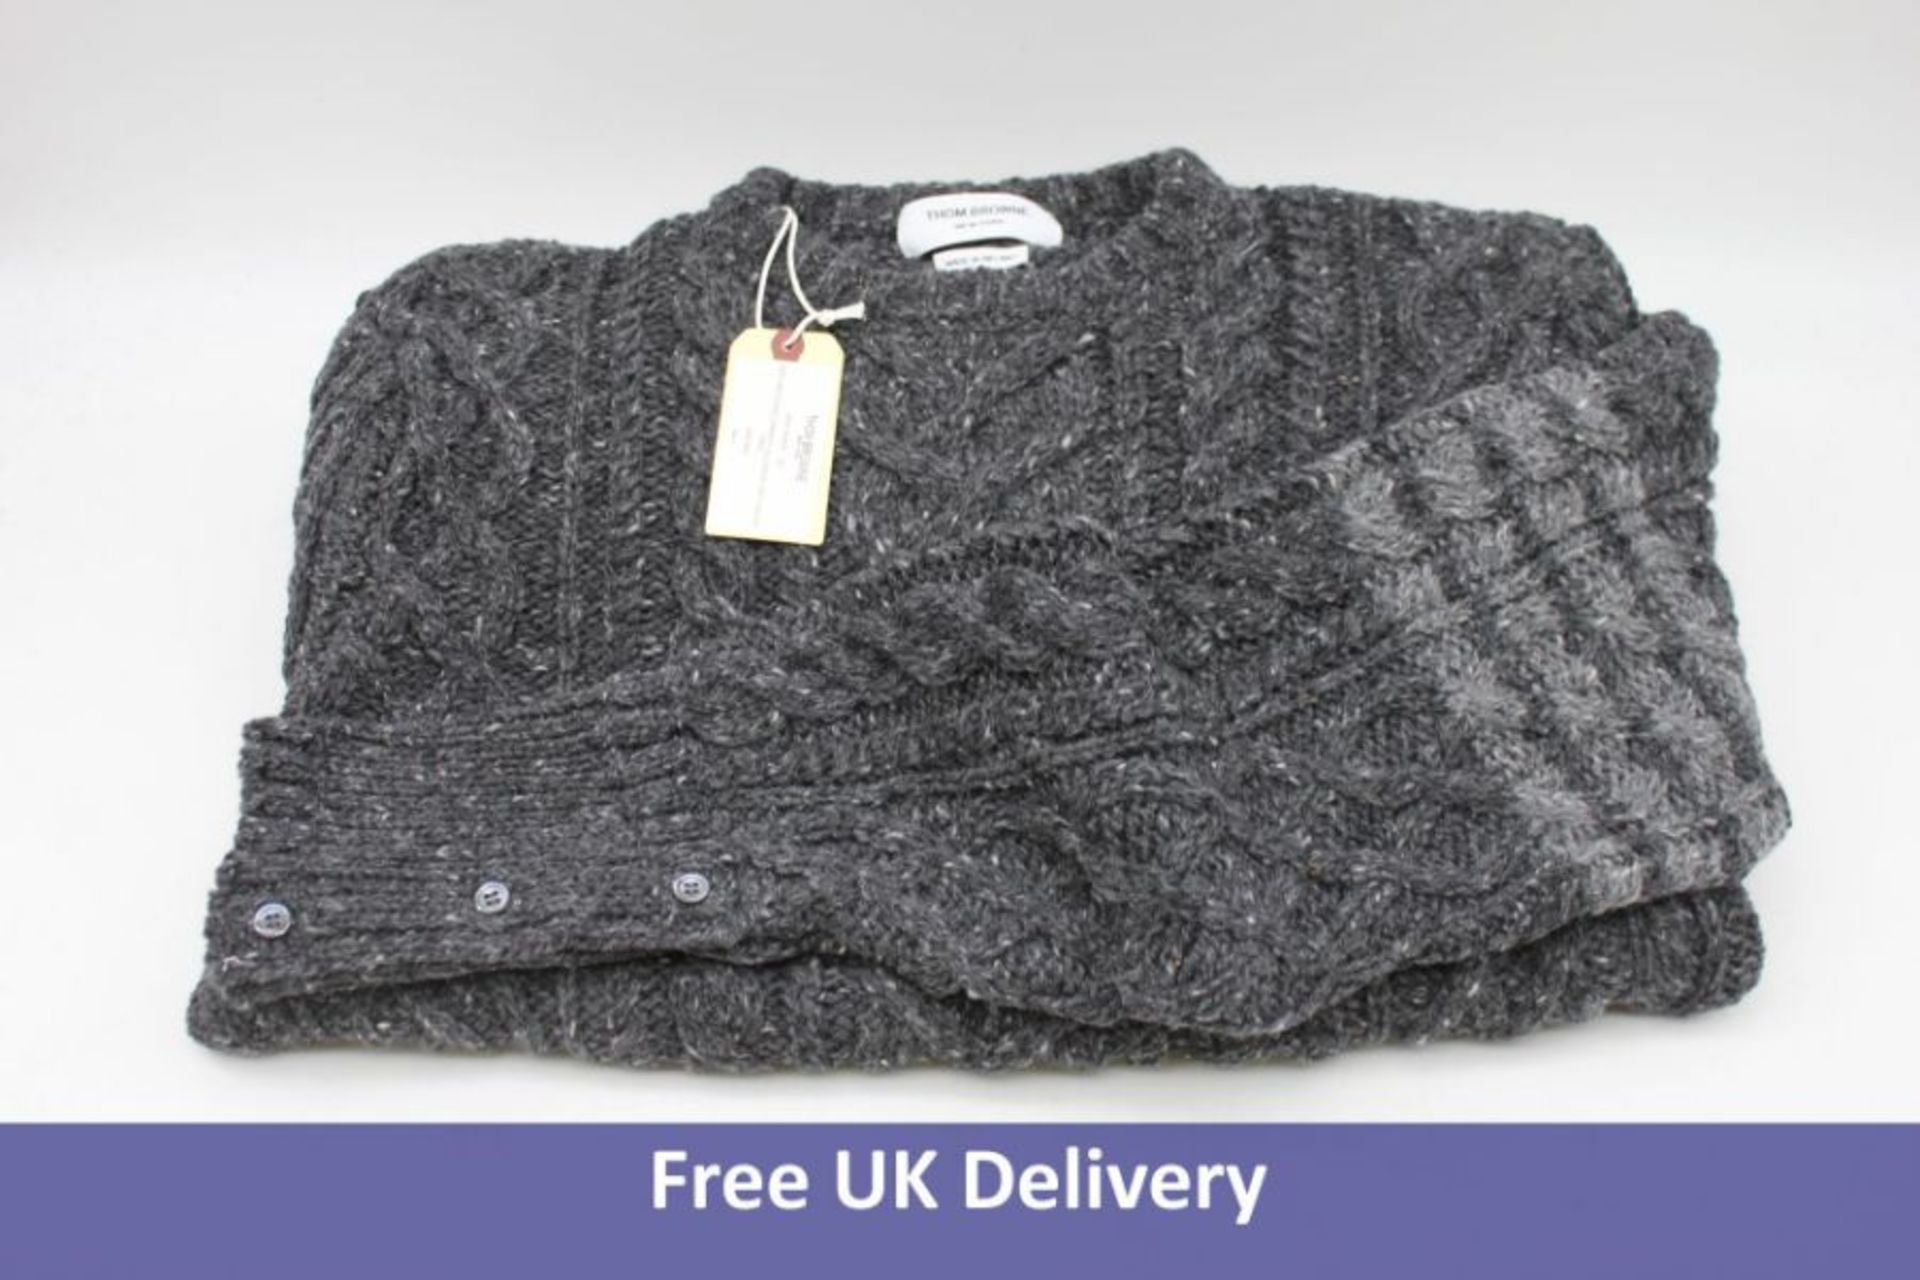 Thom Browne New York Aran Cable Classic Crewneck Pullover, W/ 4 Bar In Mohair Tweed, Dark Grey, Size